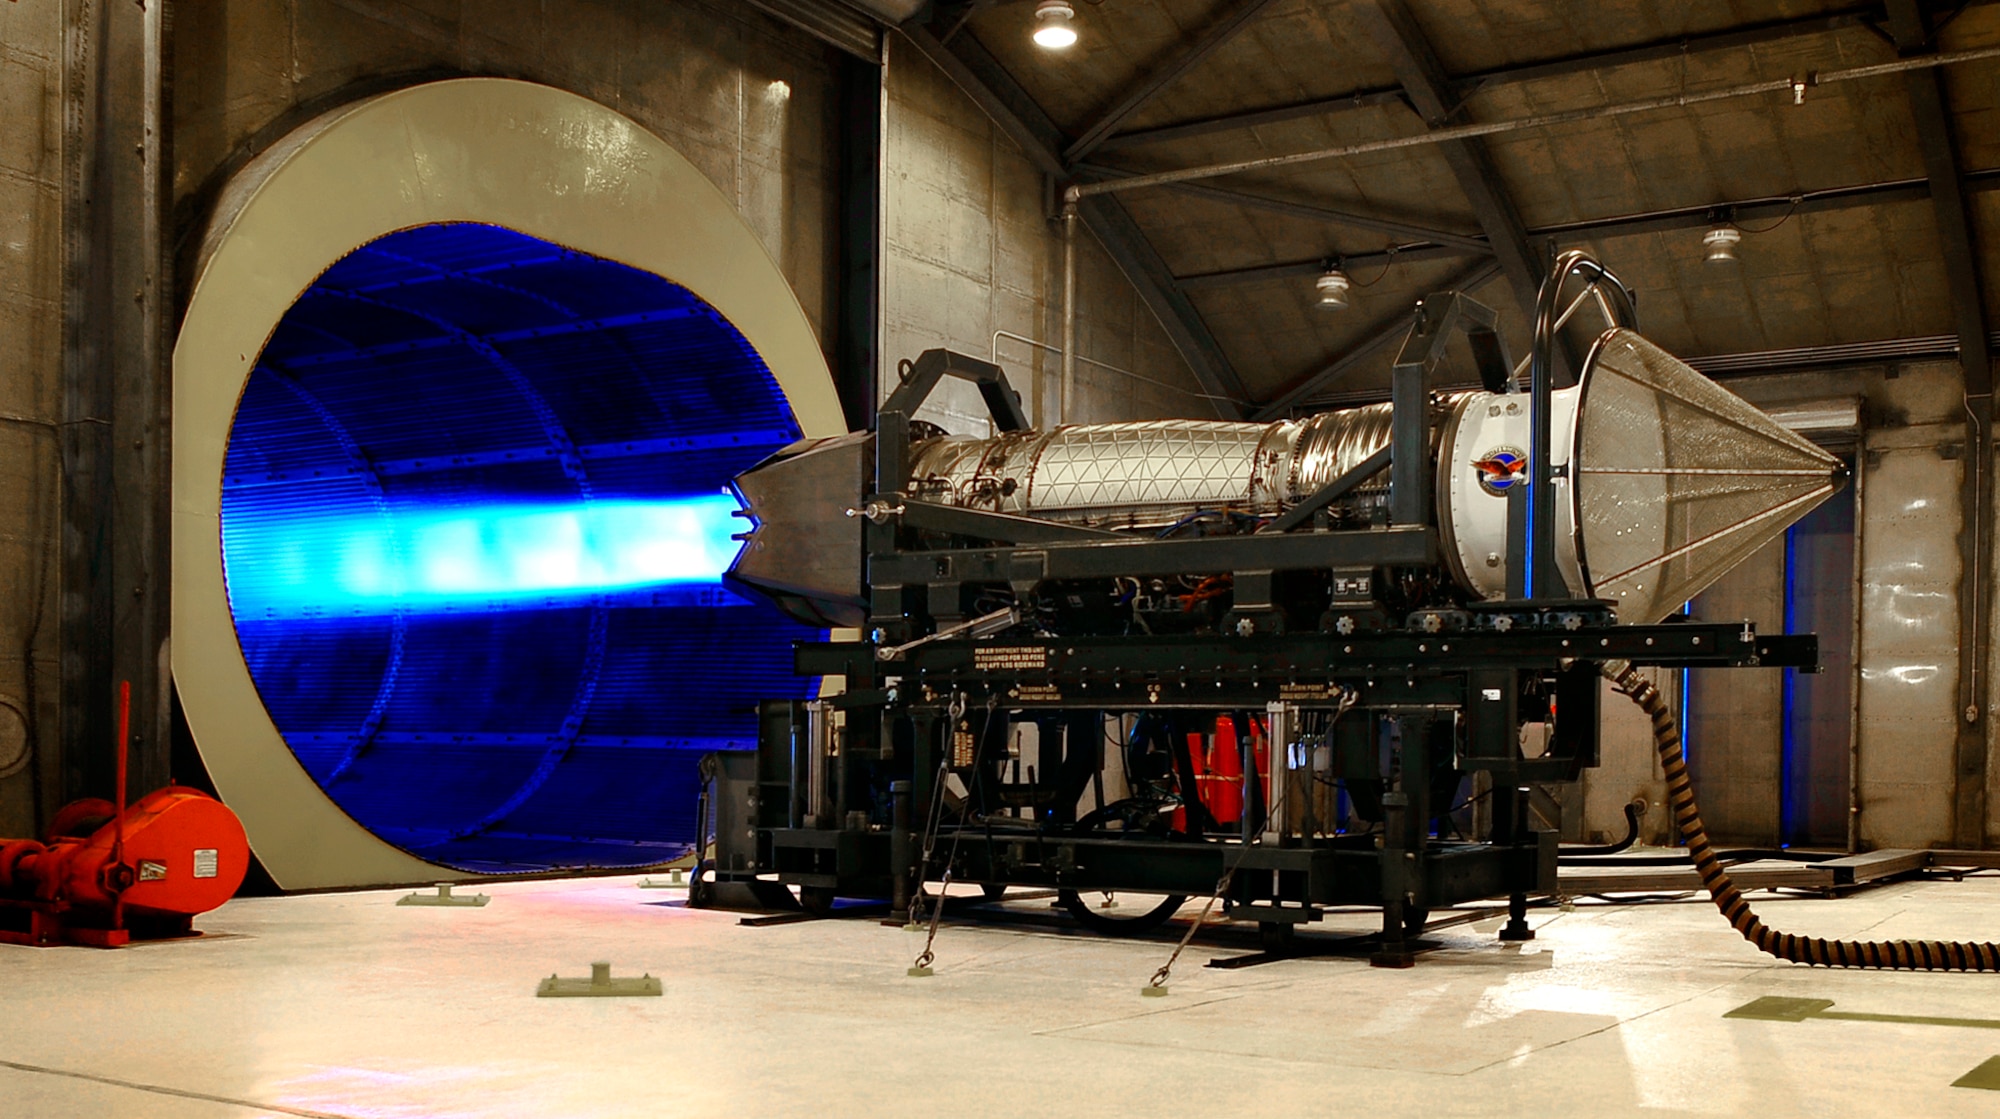 A Pratt & Whitney F119-PW-100 turbofan engine undergoes a routine performance test at the Holloman AFB Jet Engine Test Facility 17 March. The test facility is commonly referred to as the "hush House" because it allows engines to be run at full afterburner, as shown here, with minimal noise being allowed outside the facility. (U.S. Air Force Photo/TSgt Chris Flahive)